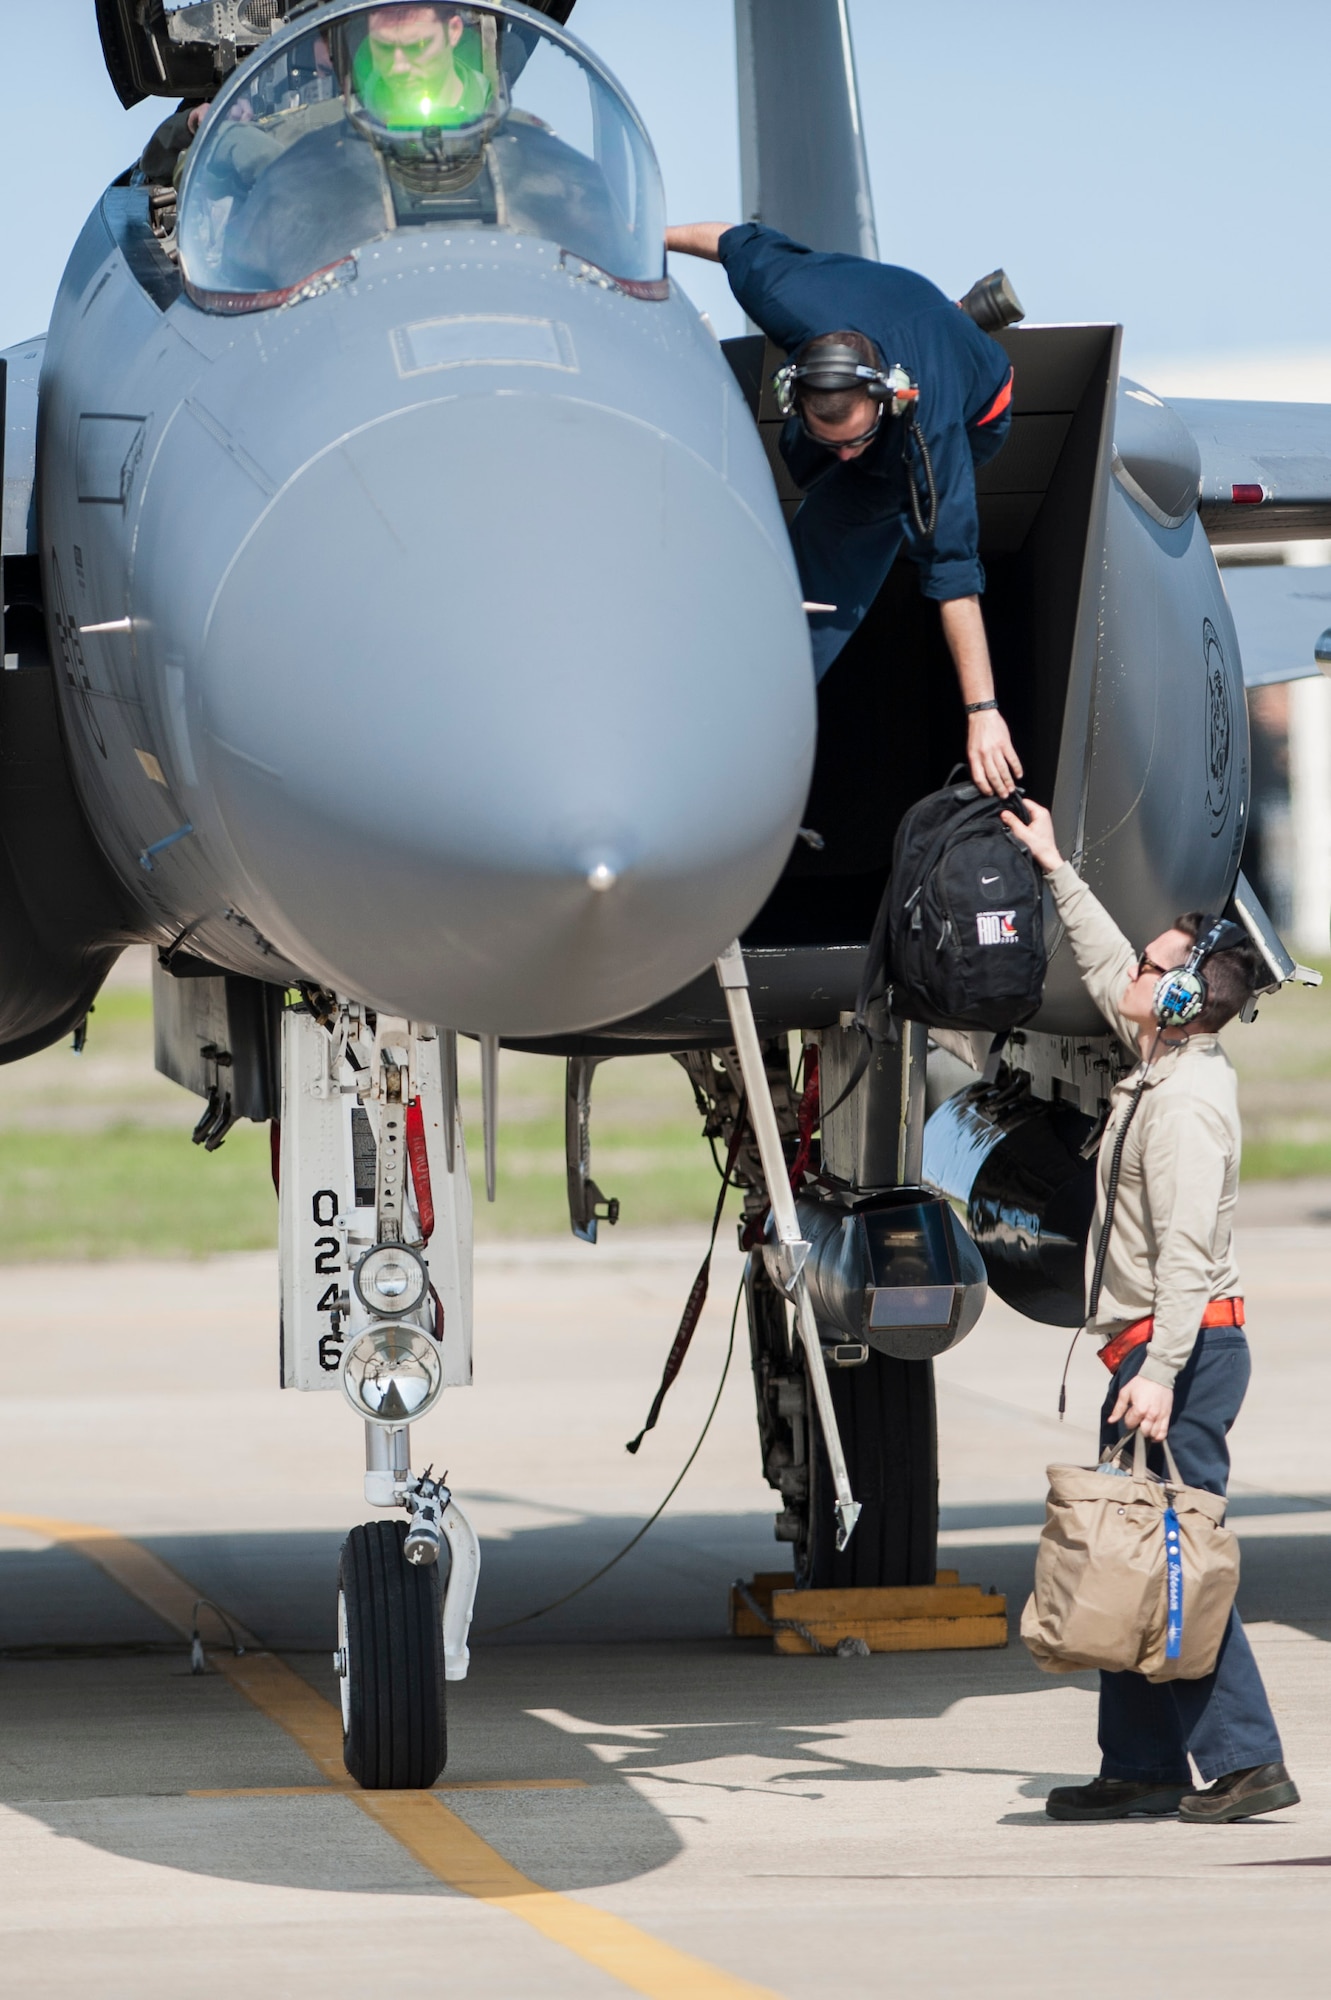 U.S. Air Force Airmen assigned to the 366th Maintenance Group at Mountain Home Air Force Base, Idaho, assists an F-15E Strike Eagle pilot at Joint Base Langley-Eustis, Va., April 14, 2017. The U.S. Air Force F-15E Strike Eagles and T-38 Talons played the roles of adversary aircraft during the ATLANTIC TRIDENT 17 exercise. (U.S. Air Force photo/Airman 1st Class Tristan Biese)